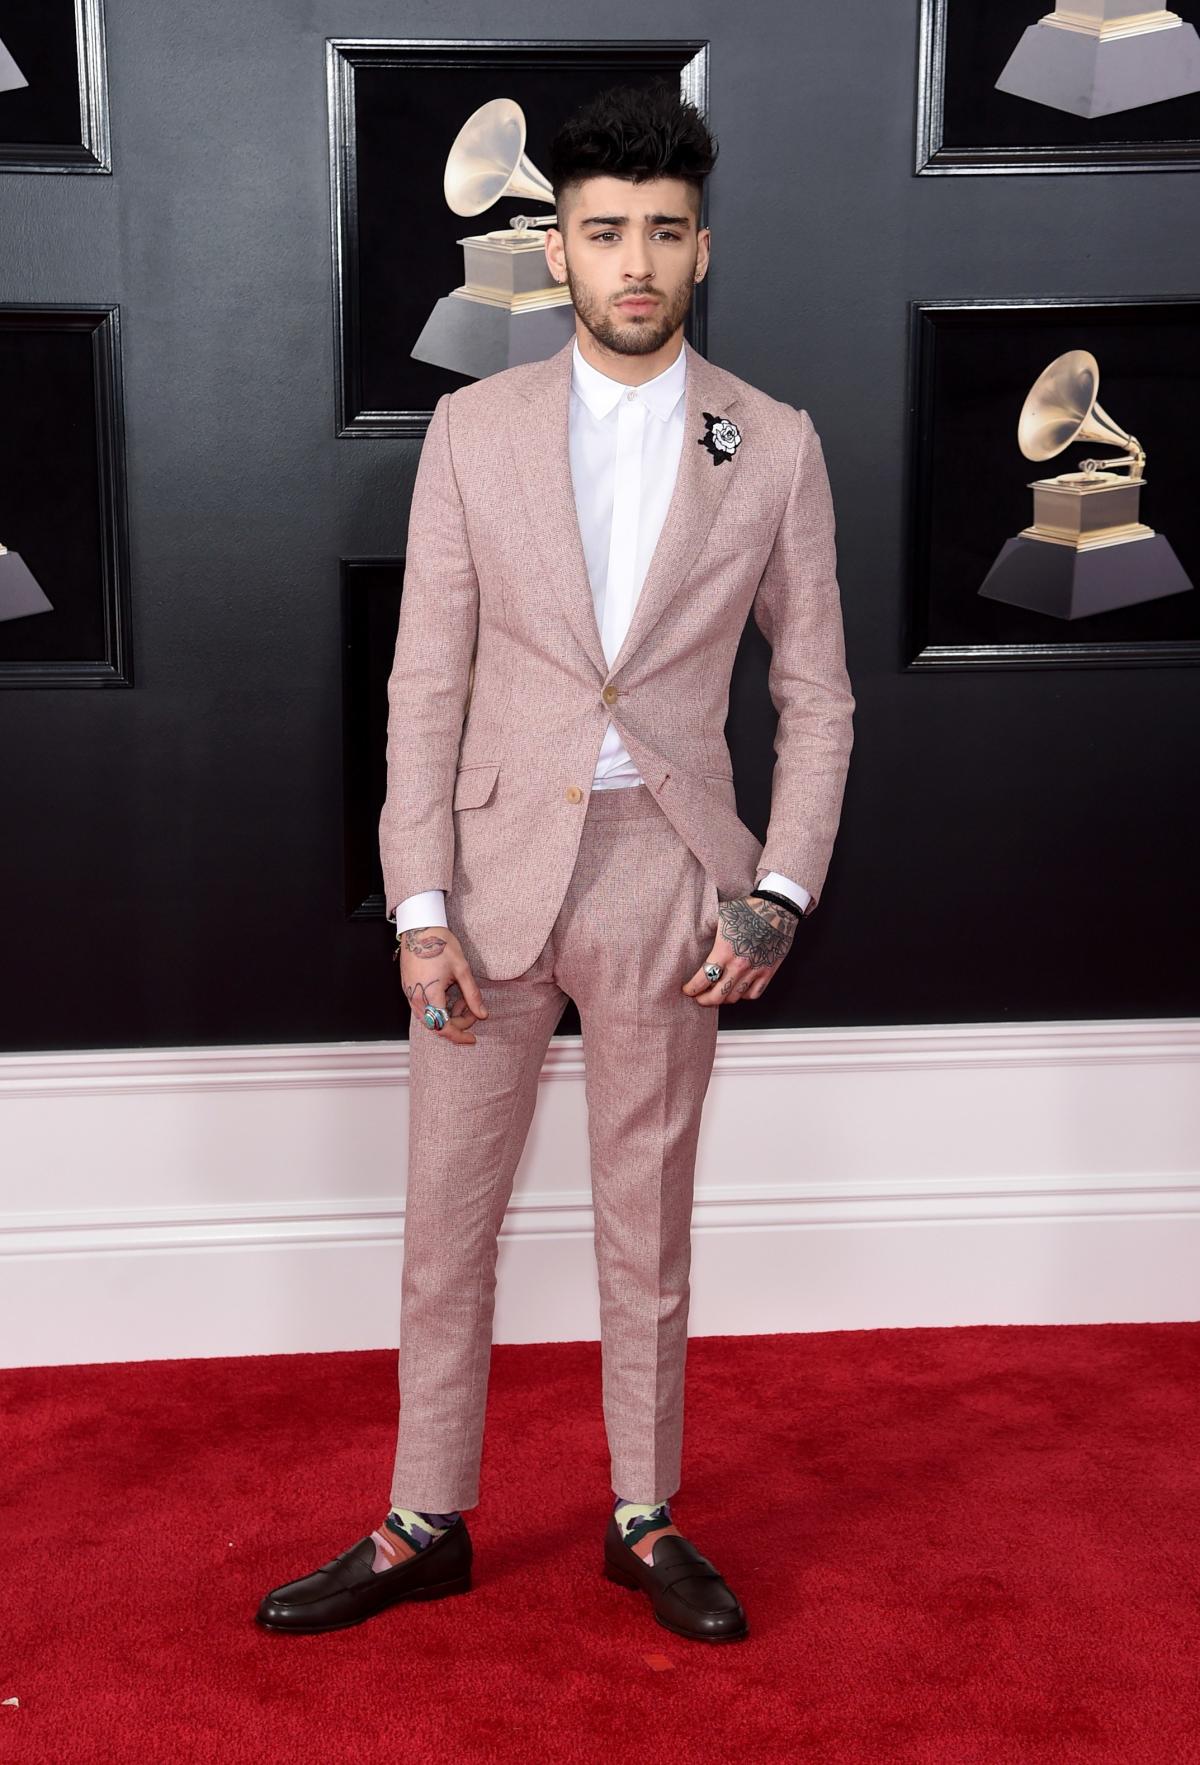 Grammys 2018: The Best (and Most Wildly) Dressed Men